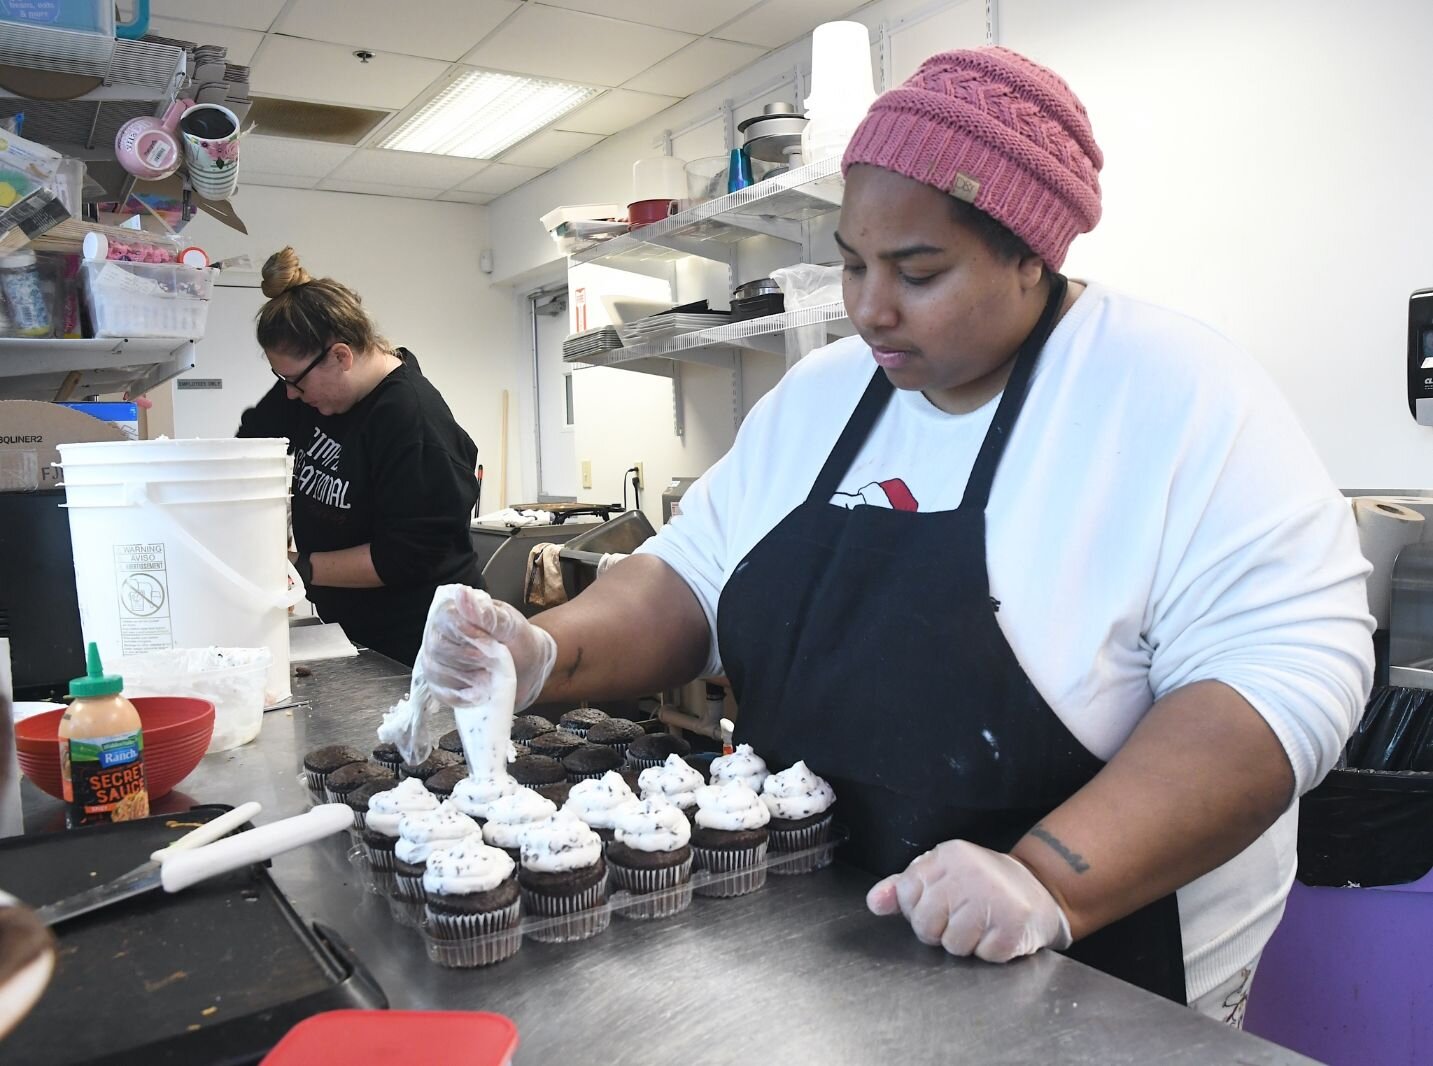 Markeeta Palmer, owner of Simply Sensational, 80 W. Michigan in downtown Battle Creek, decorates a pastry.